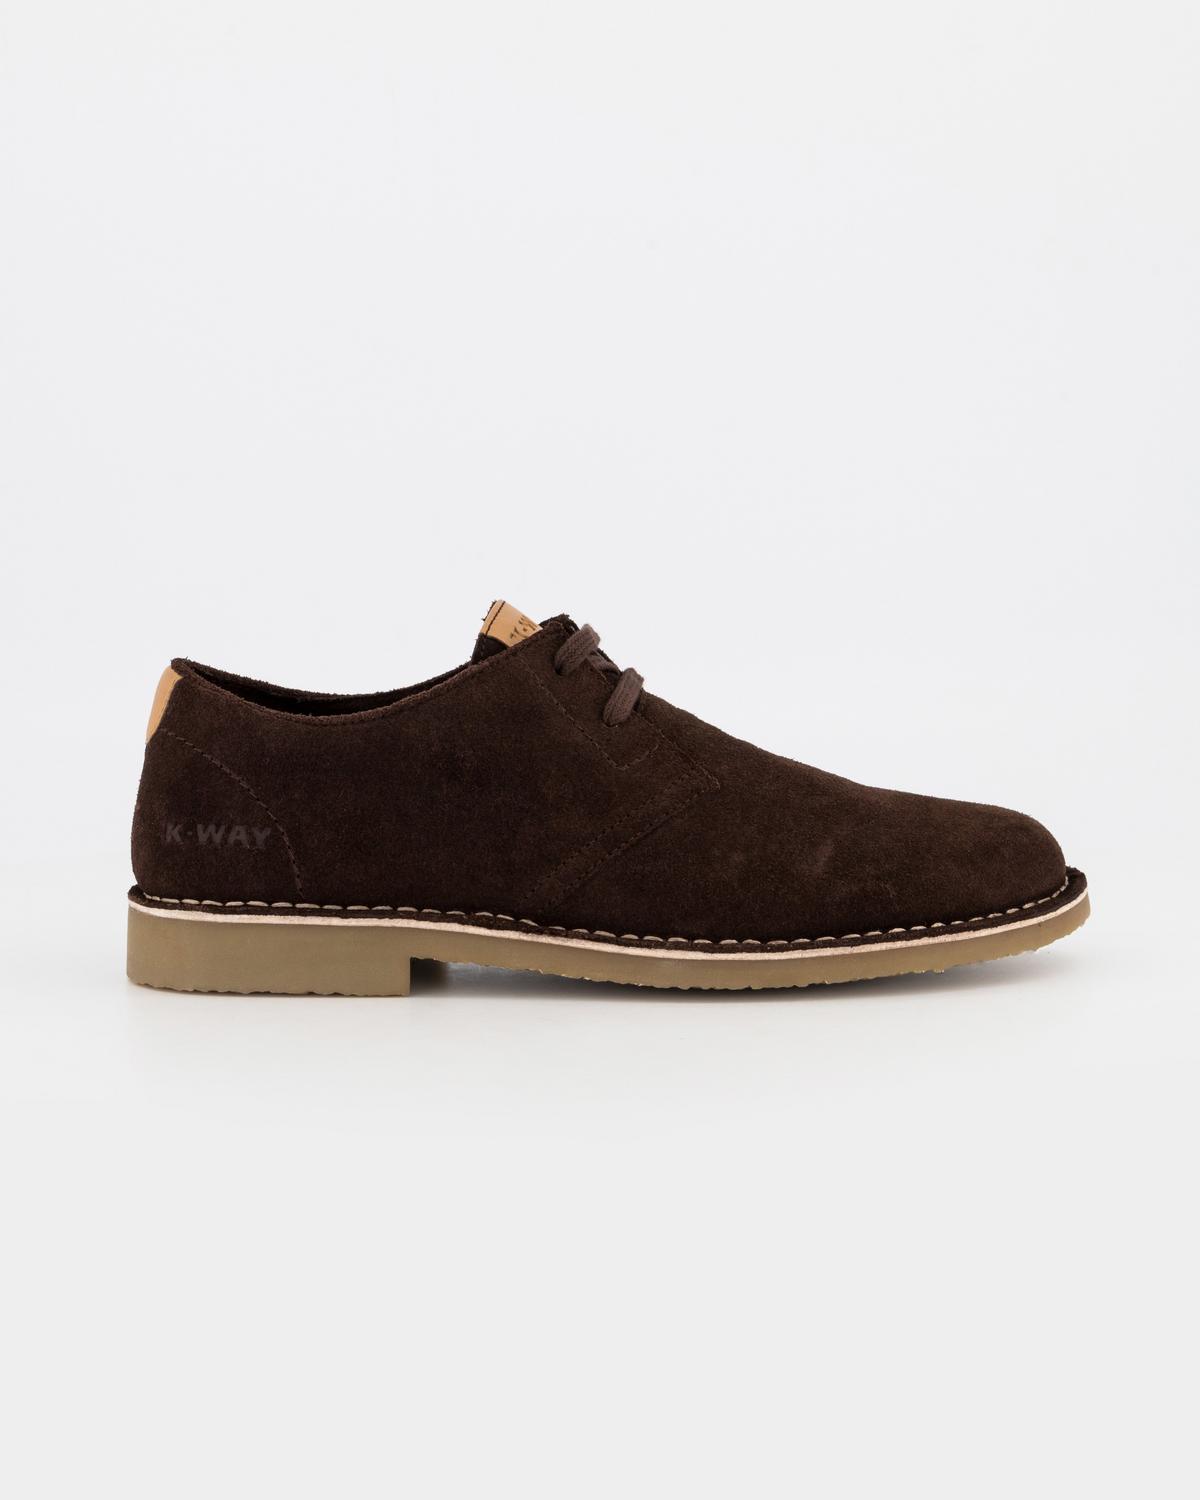 K-Way Elements Men’s Charles Derby Shoes -  Brown